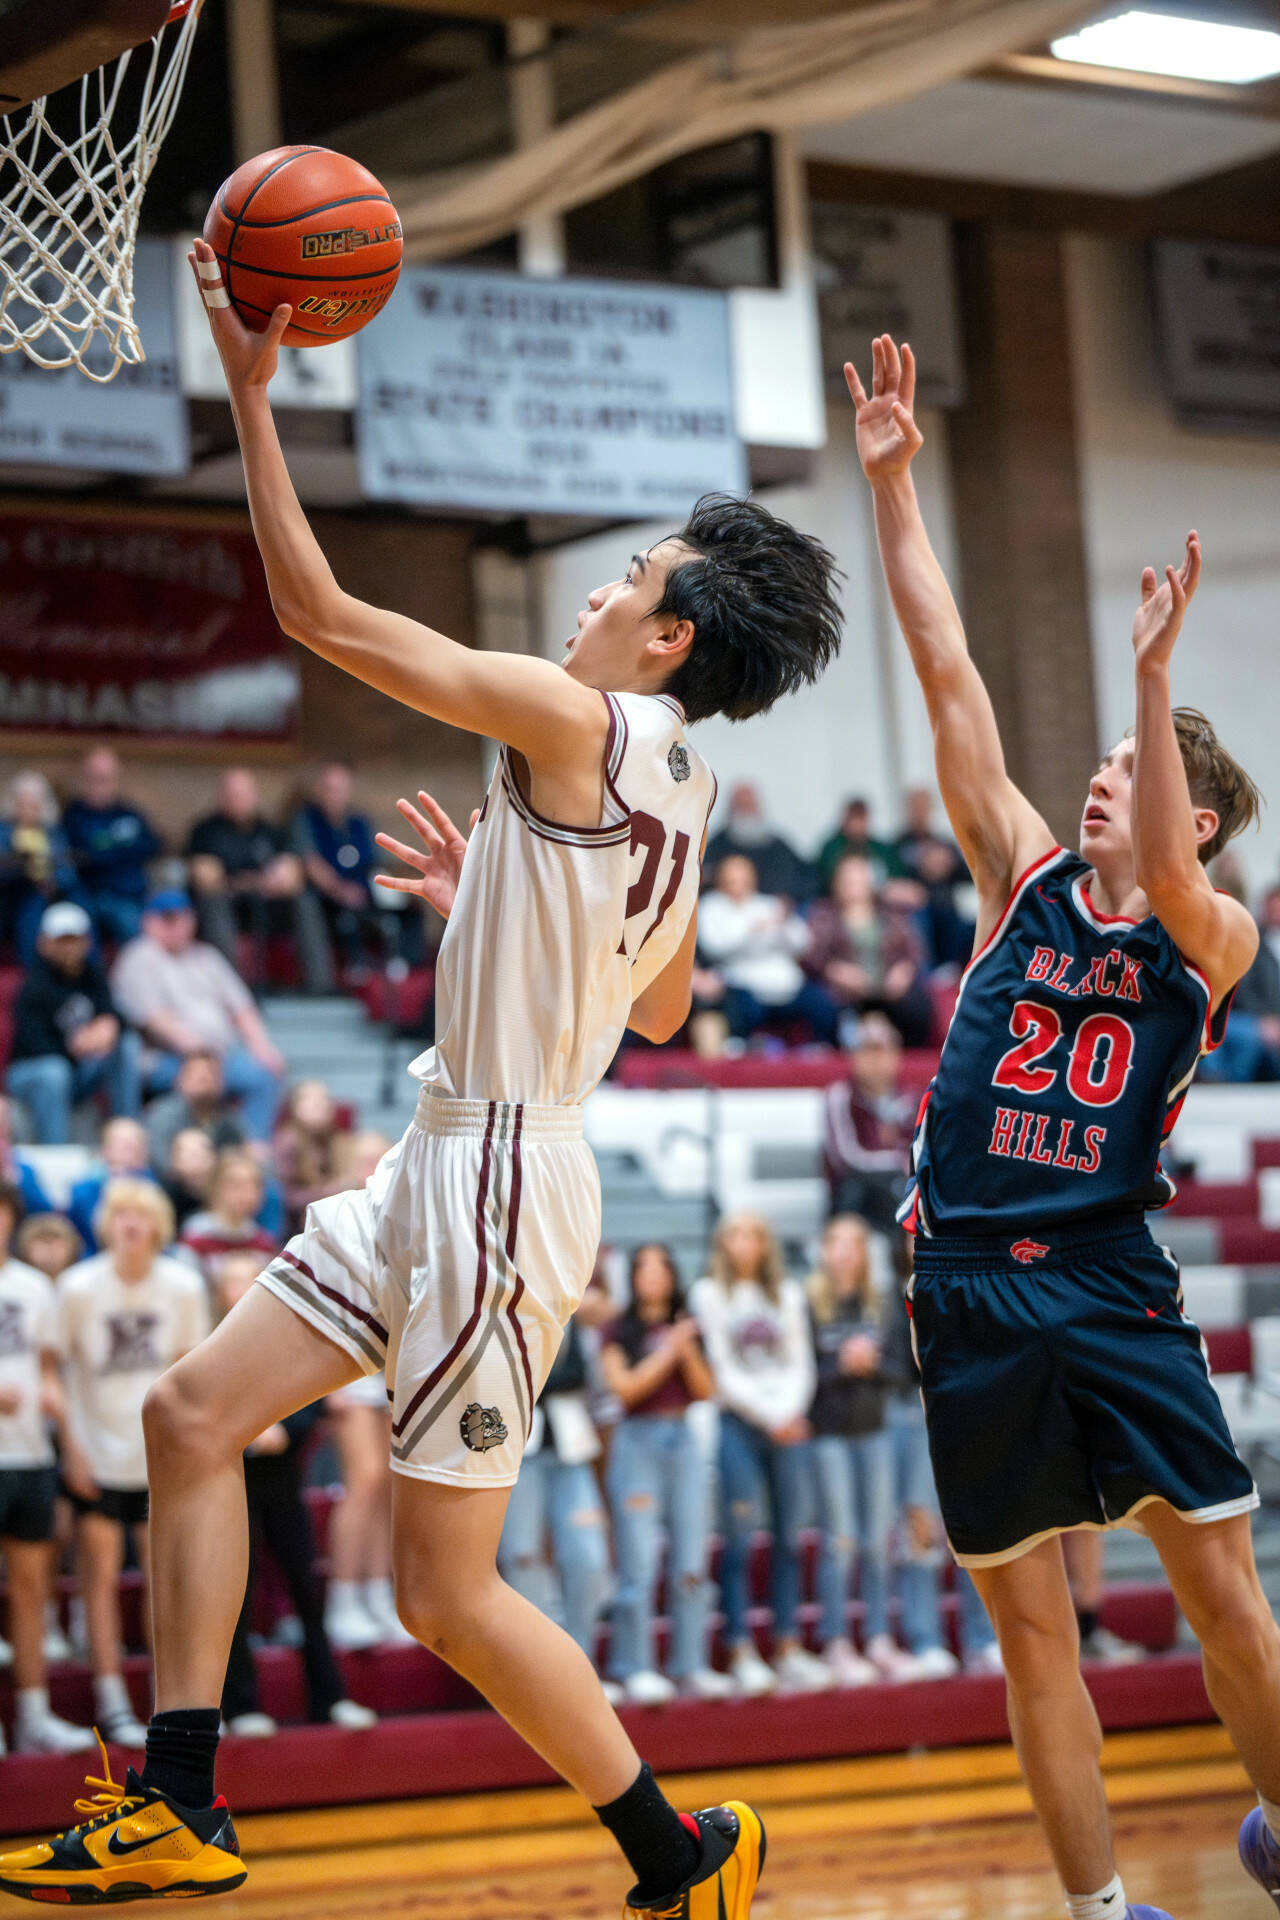 PHOTO BY FOREST WORGUM Montesano’s Delon Chan, left, glides to the basket while Black Hills’ Quinton Morrill during the Bulldogs’ 67-52 win in the Montesano Winter Classic on Friday in Montesano.